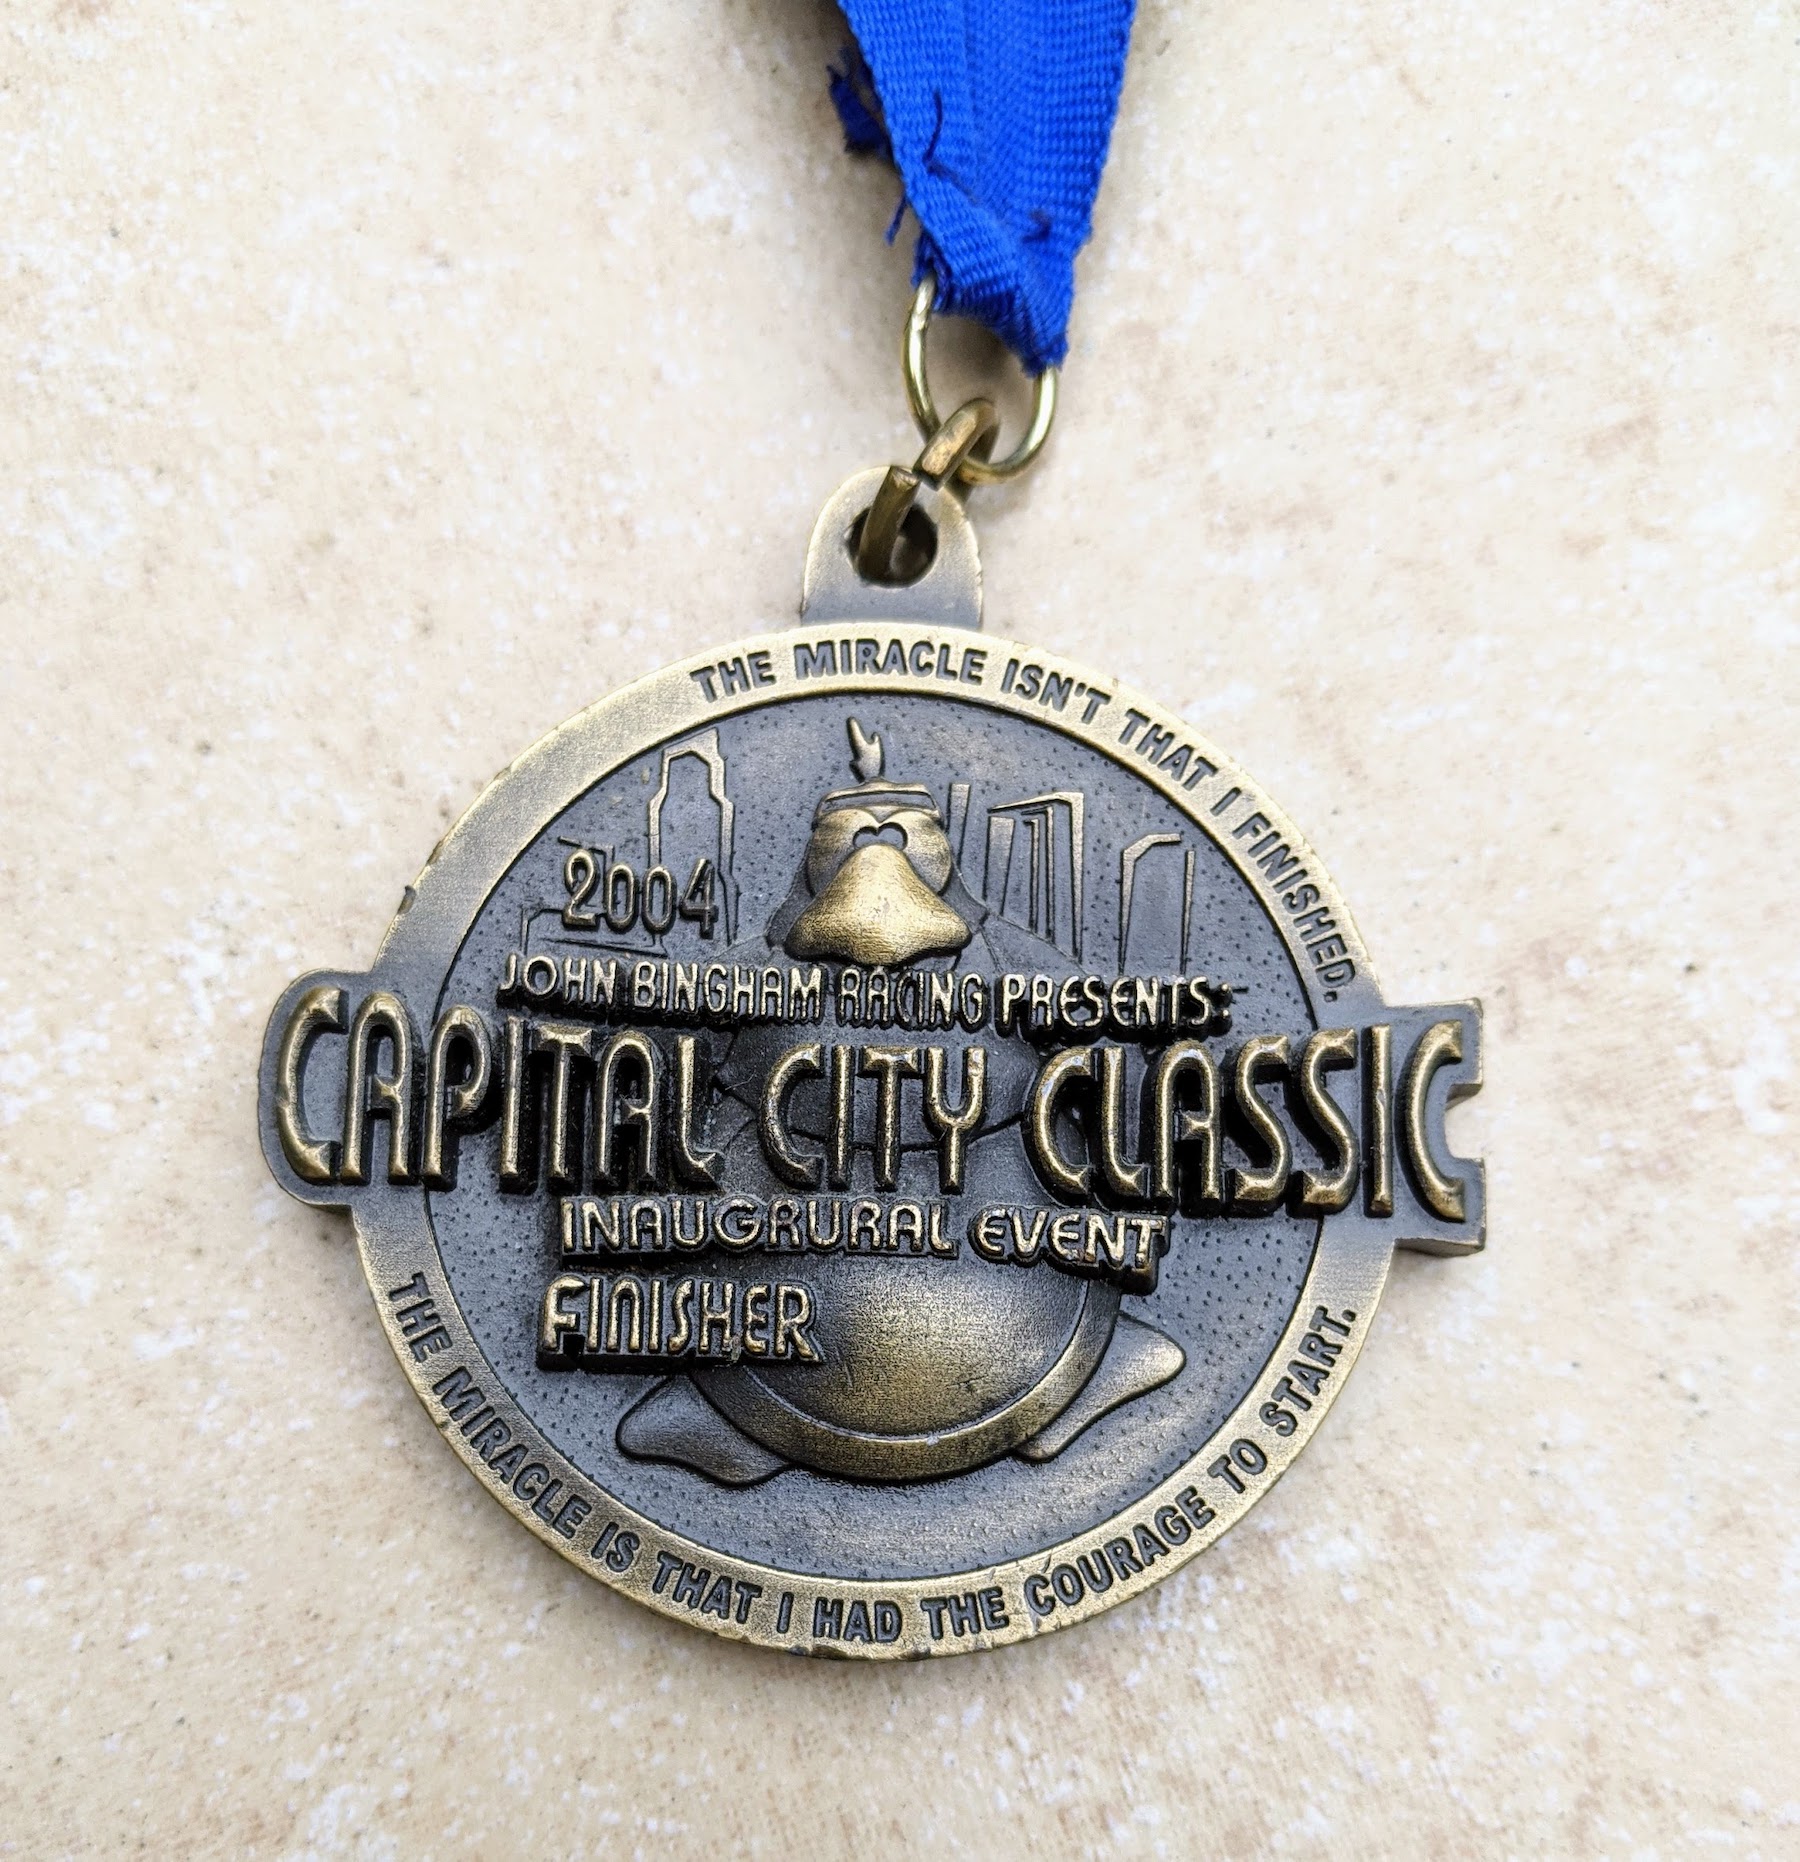 The medal from the first Capital city Half Marathon that is a very walker friendly half marathon. Train to walk a half marathon with Capital City